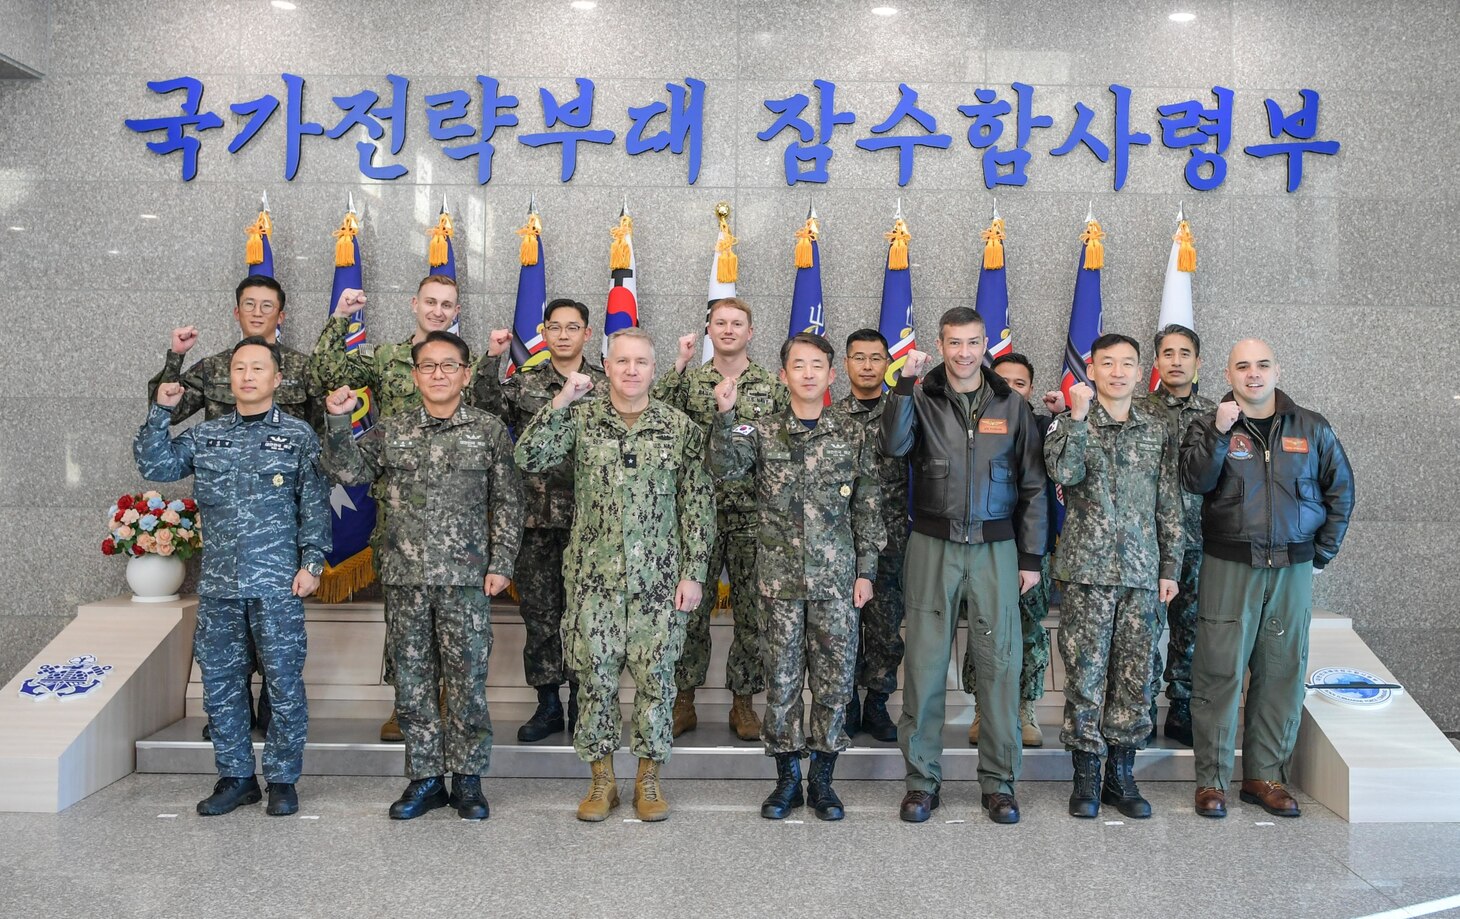 CHINHAE, Republic of Korea (Jan. 25, 2023) Leadership from the Republic of Korea (ROK) Navy and Commander, Submarine Group 7/Task Force 74 pose for a photo at ROK Navy Submarine Force Command (CSF) in Chinhae, Republic of Korea, Jan. 25. CSG 7 directs forward-deployed combat-capable forces across the full spectrum of undersea warfare throughout the Western Pacific, Indian Ocean and Arabian Sea. (Photo courtesy of ROK Navy Public Affairs)